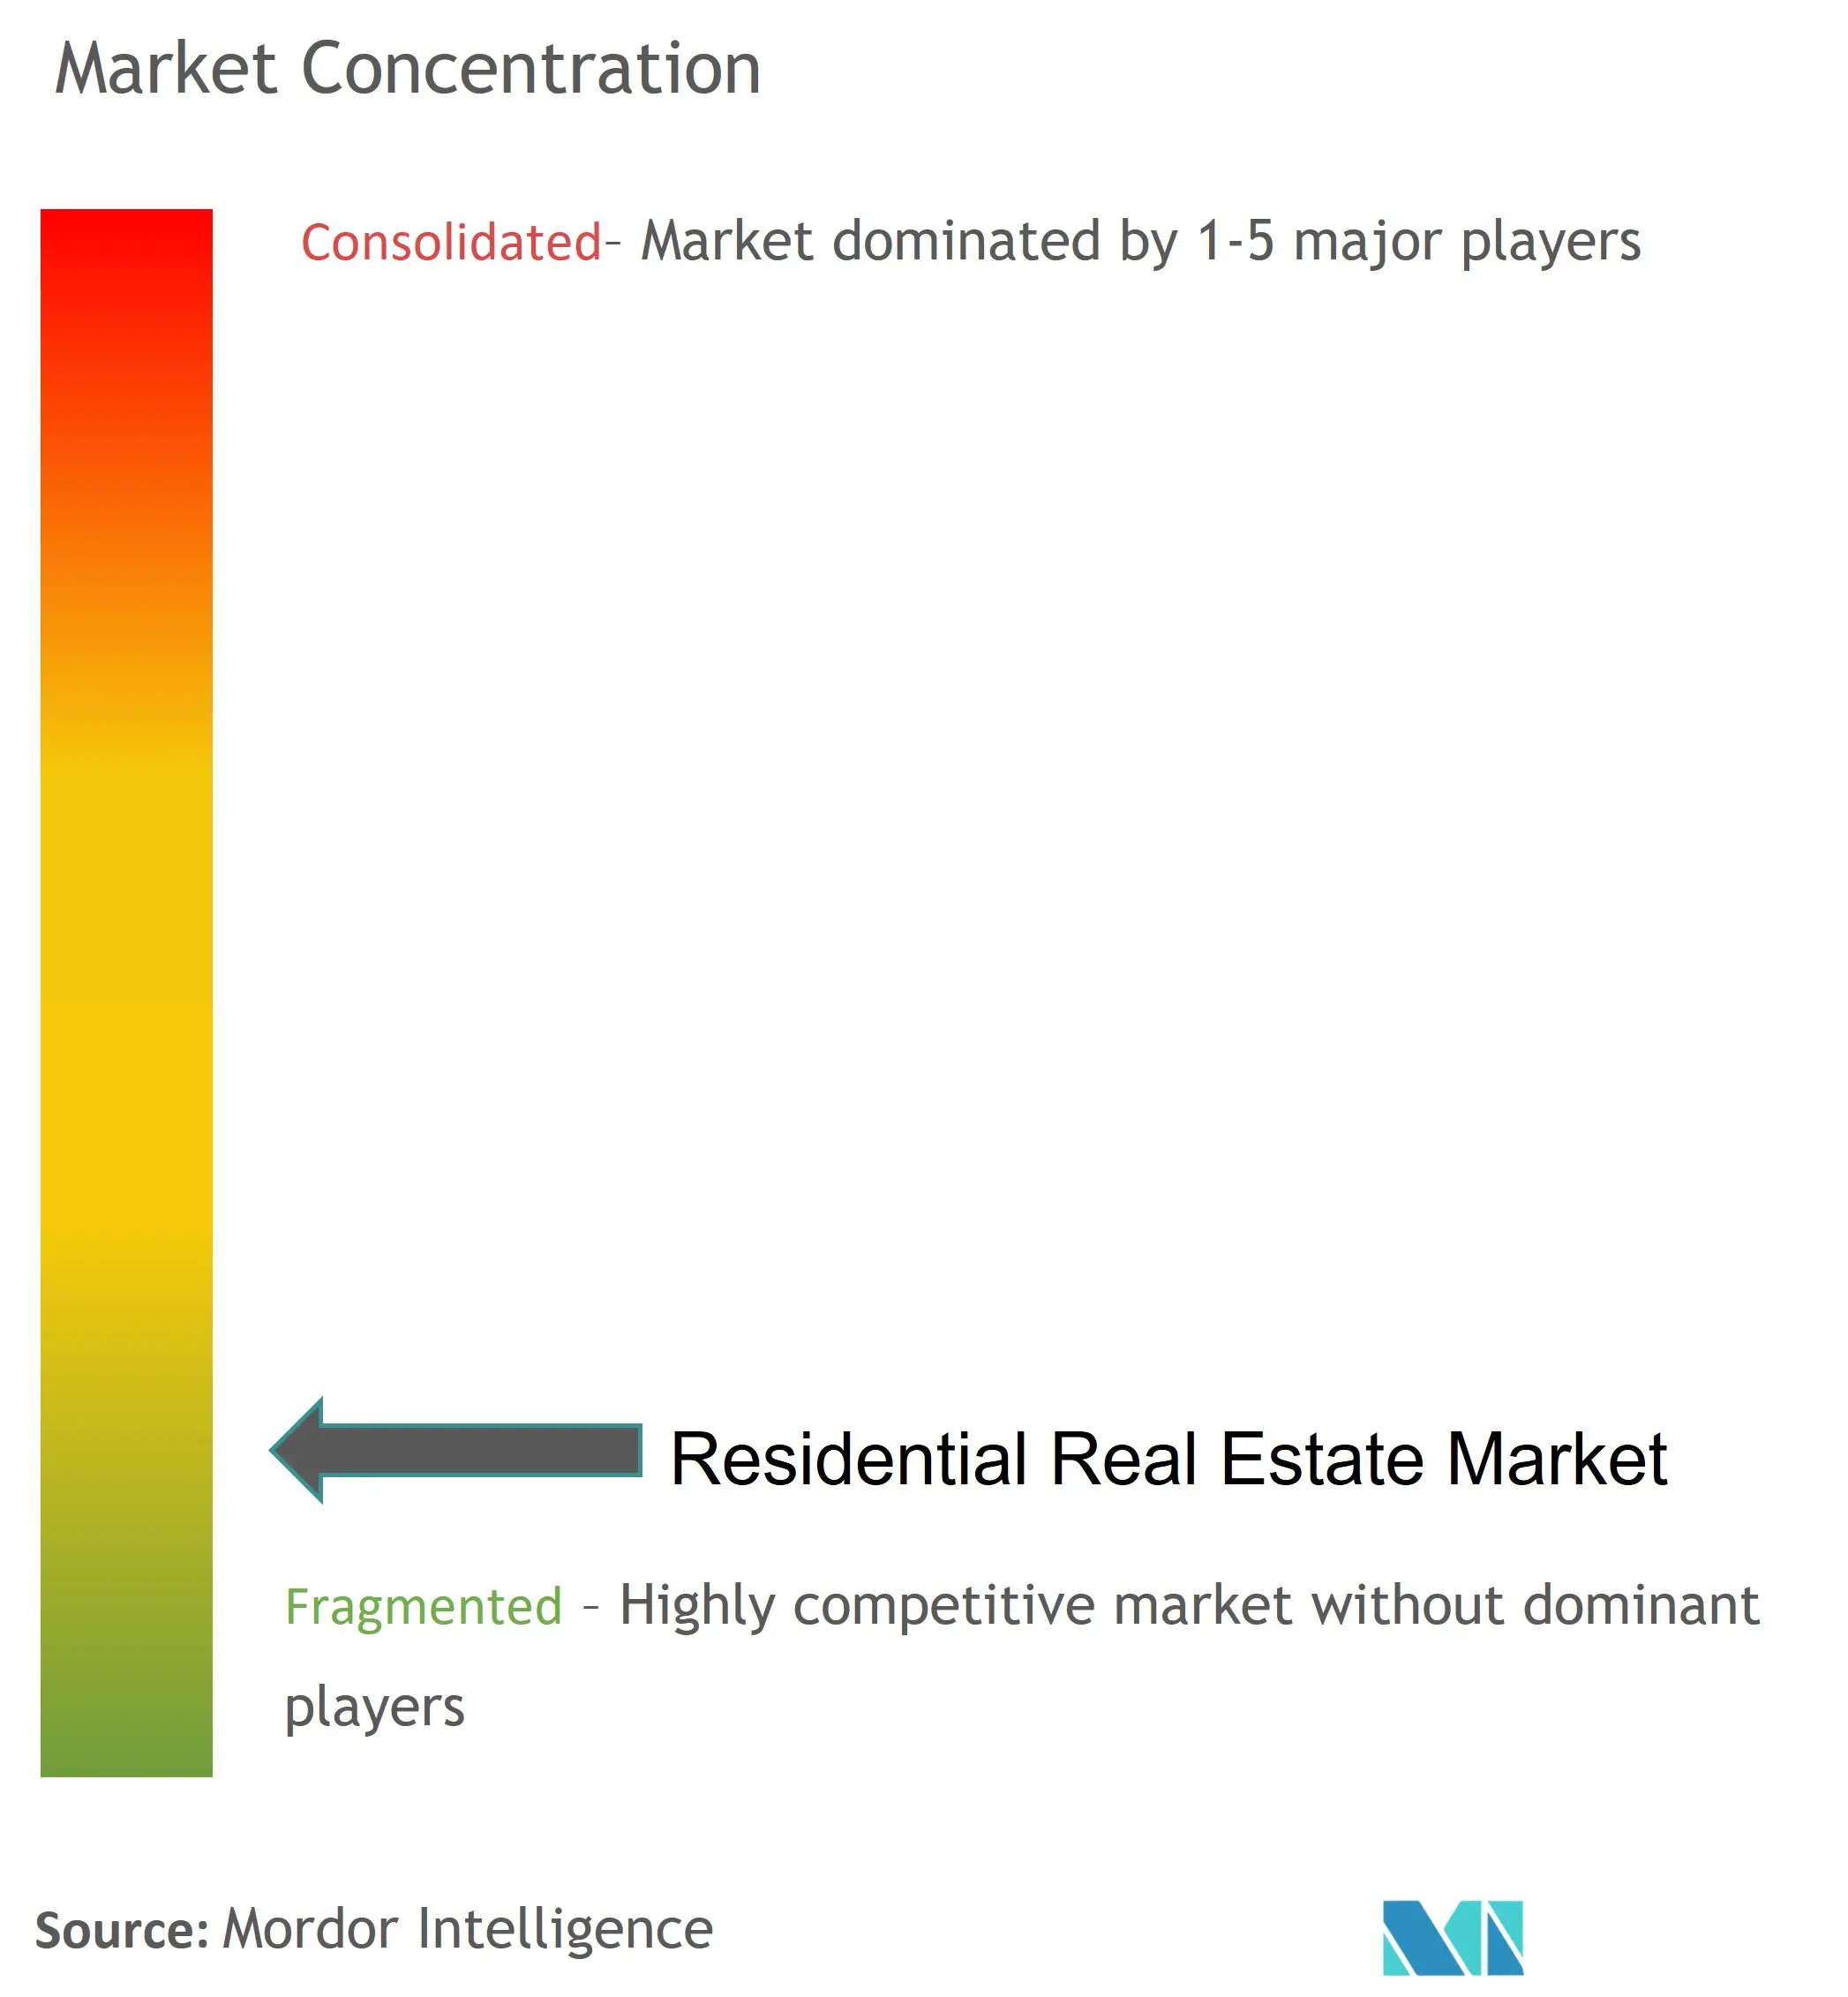 Residential Real Estate Market Concentration